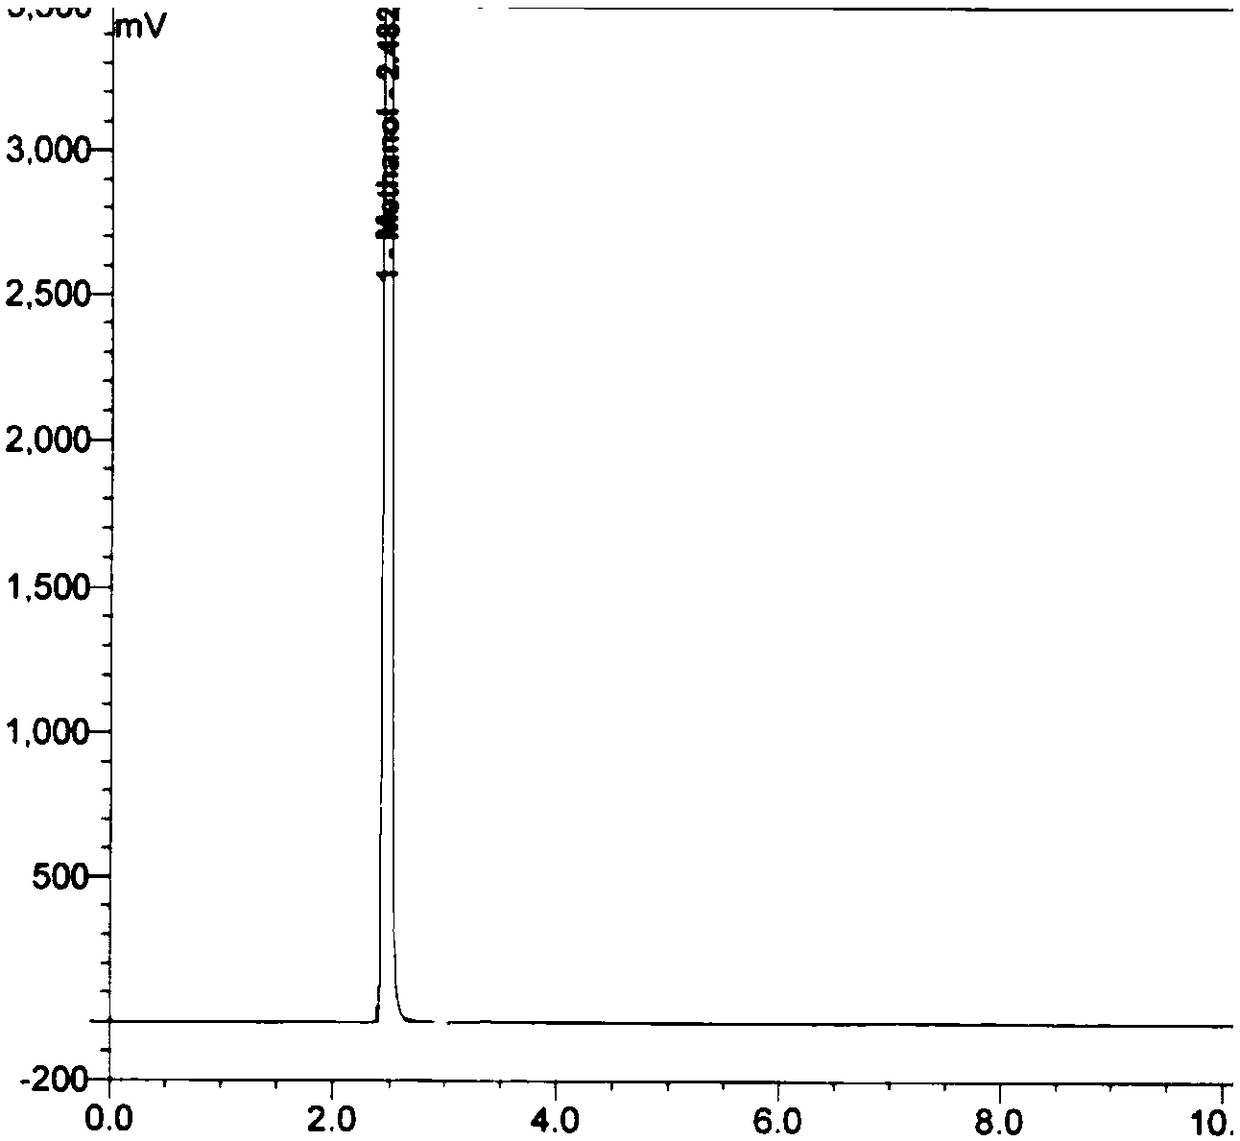 Method for detecting residual solvents in heparin sodium by headspace gas chromatography